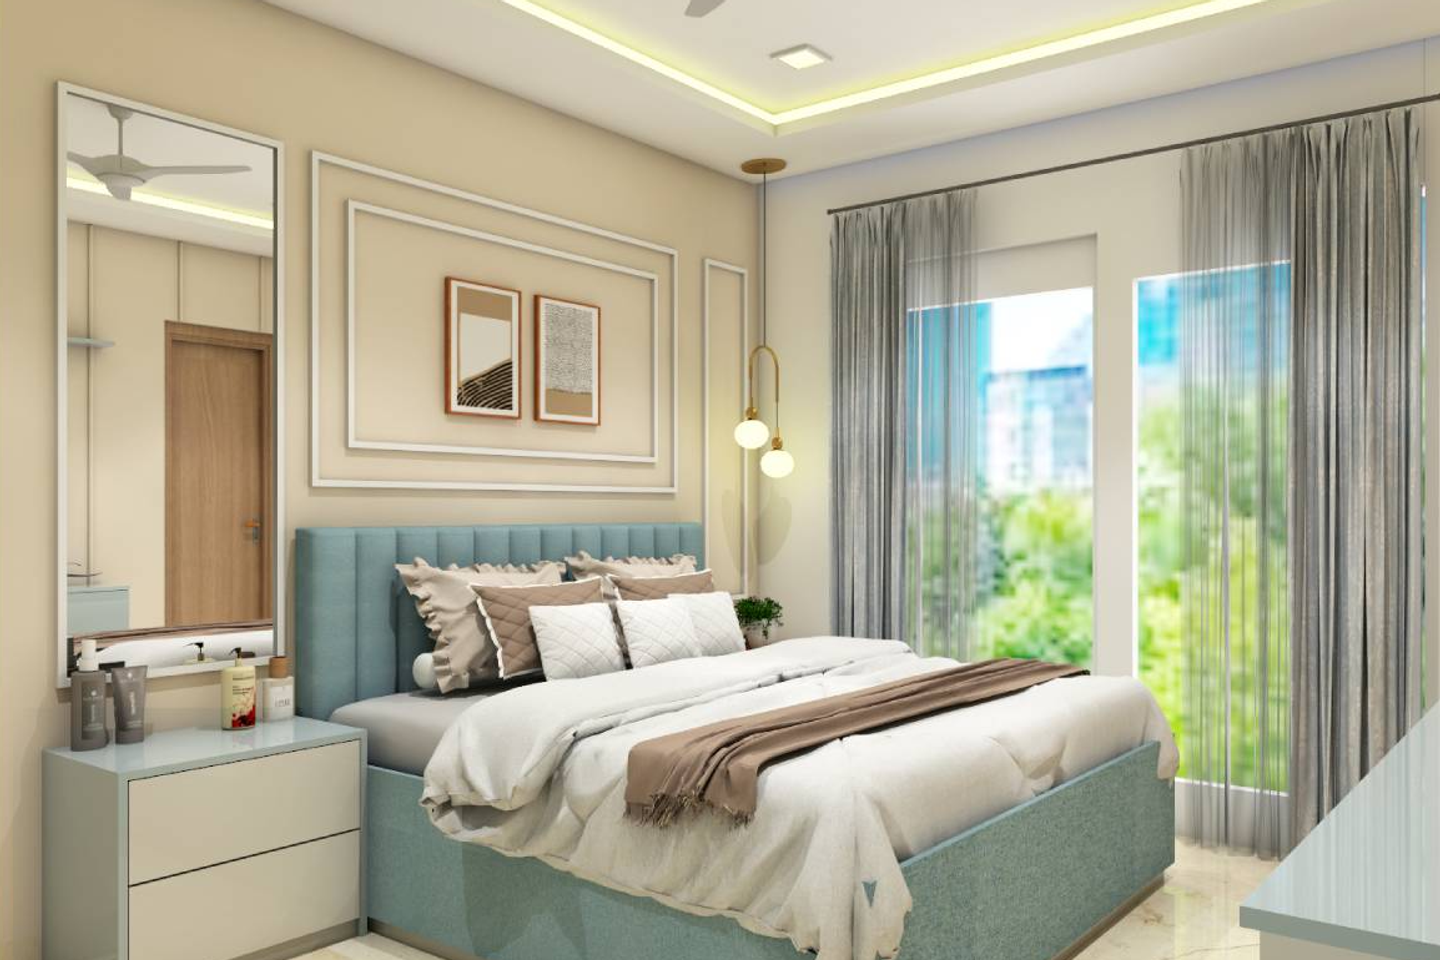 Spacious Master Bedroom Design With Light Blue Bed | Livspace